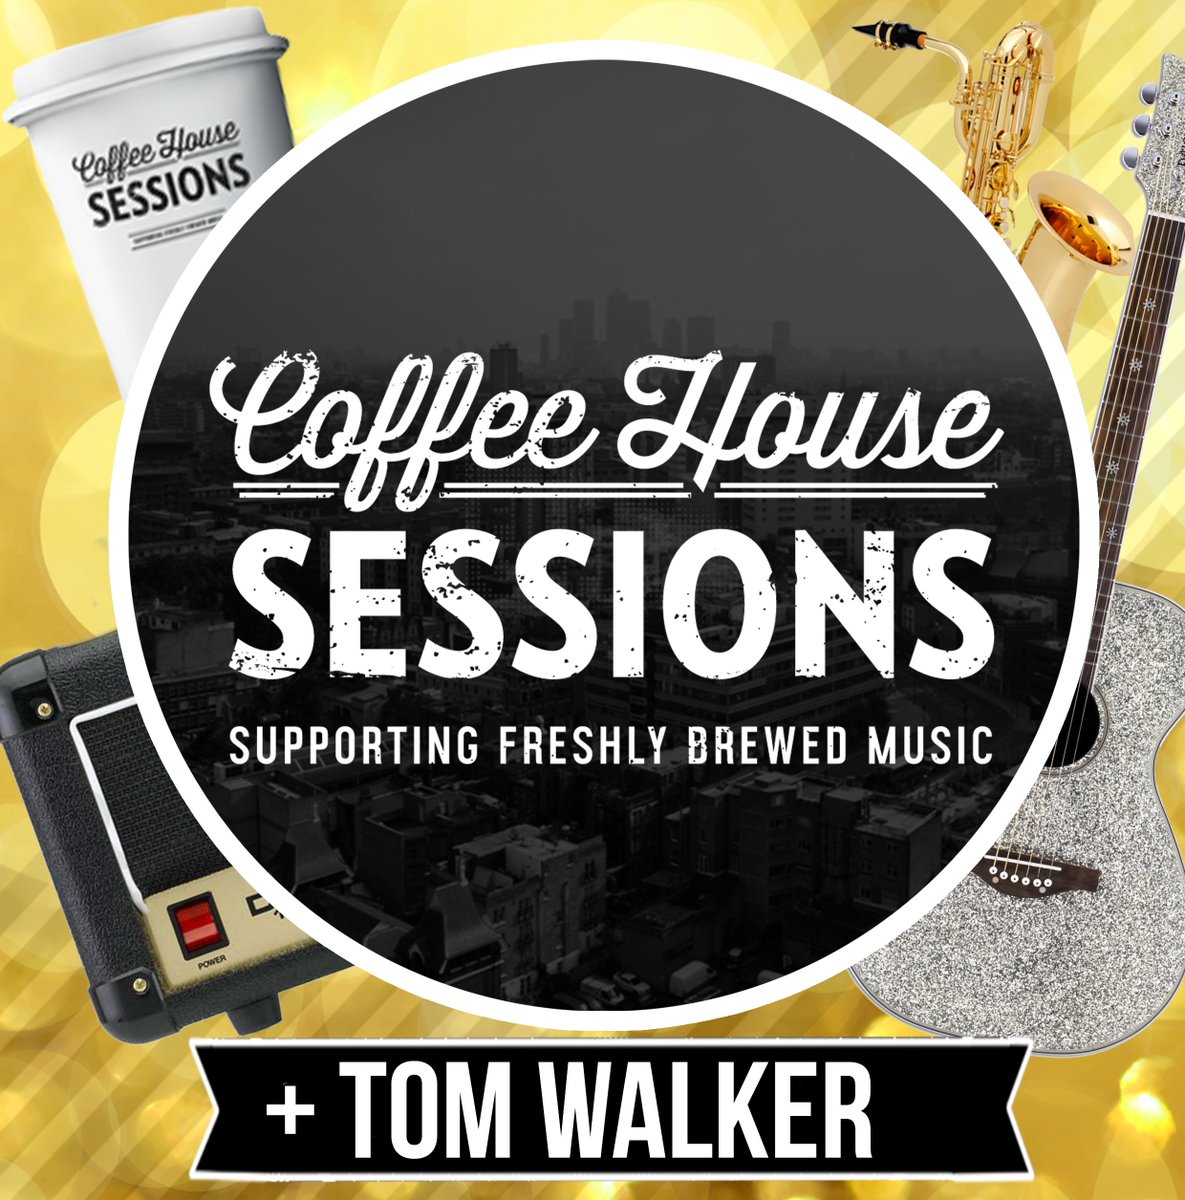 .@_RosieTurner caught up w/ @iamtomwalker for the 1st episode of the #CHSPodcast! Get your headphones & get stuck in soundcloud.com/user-346729775…